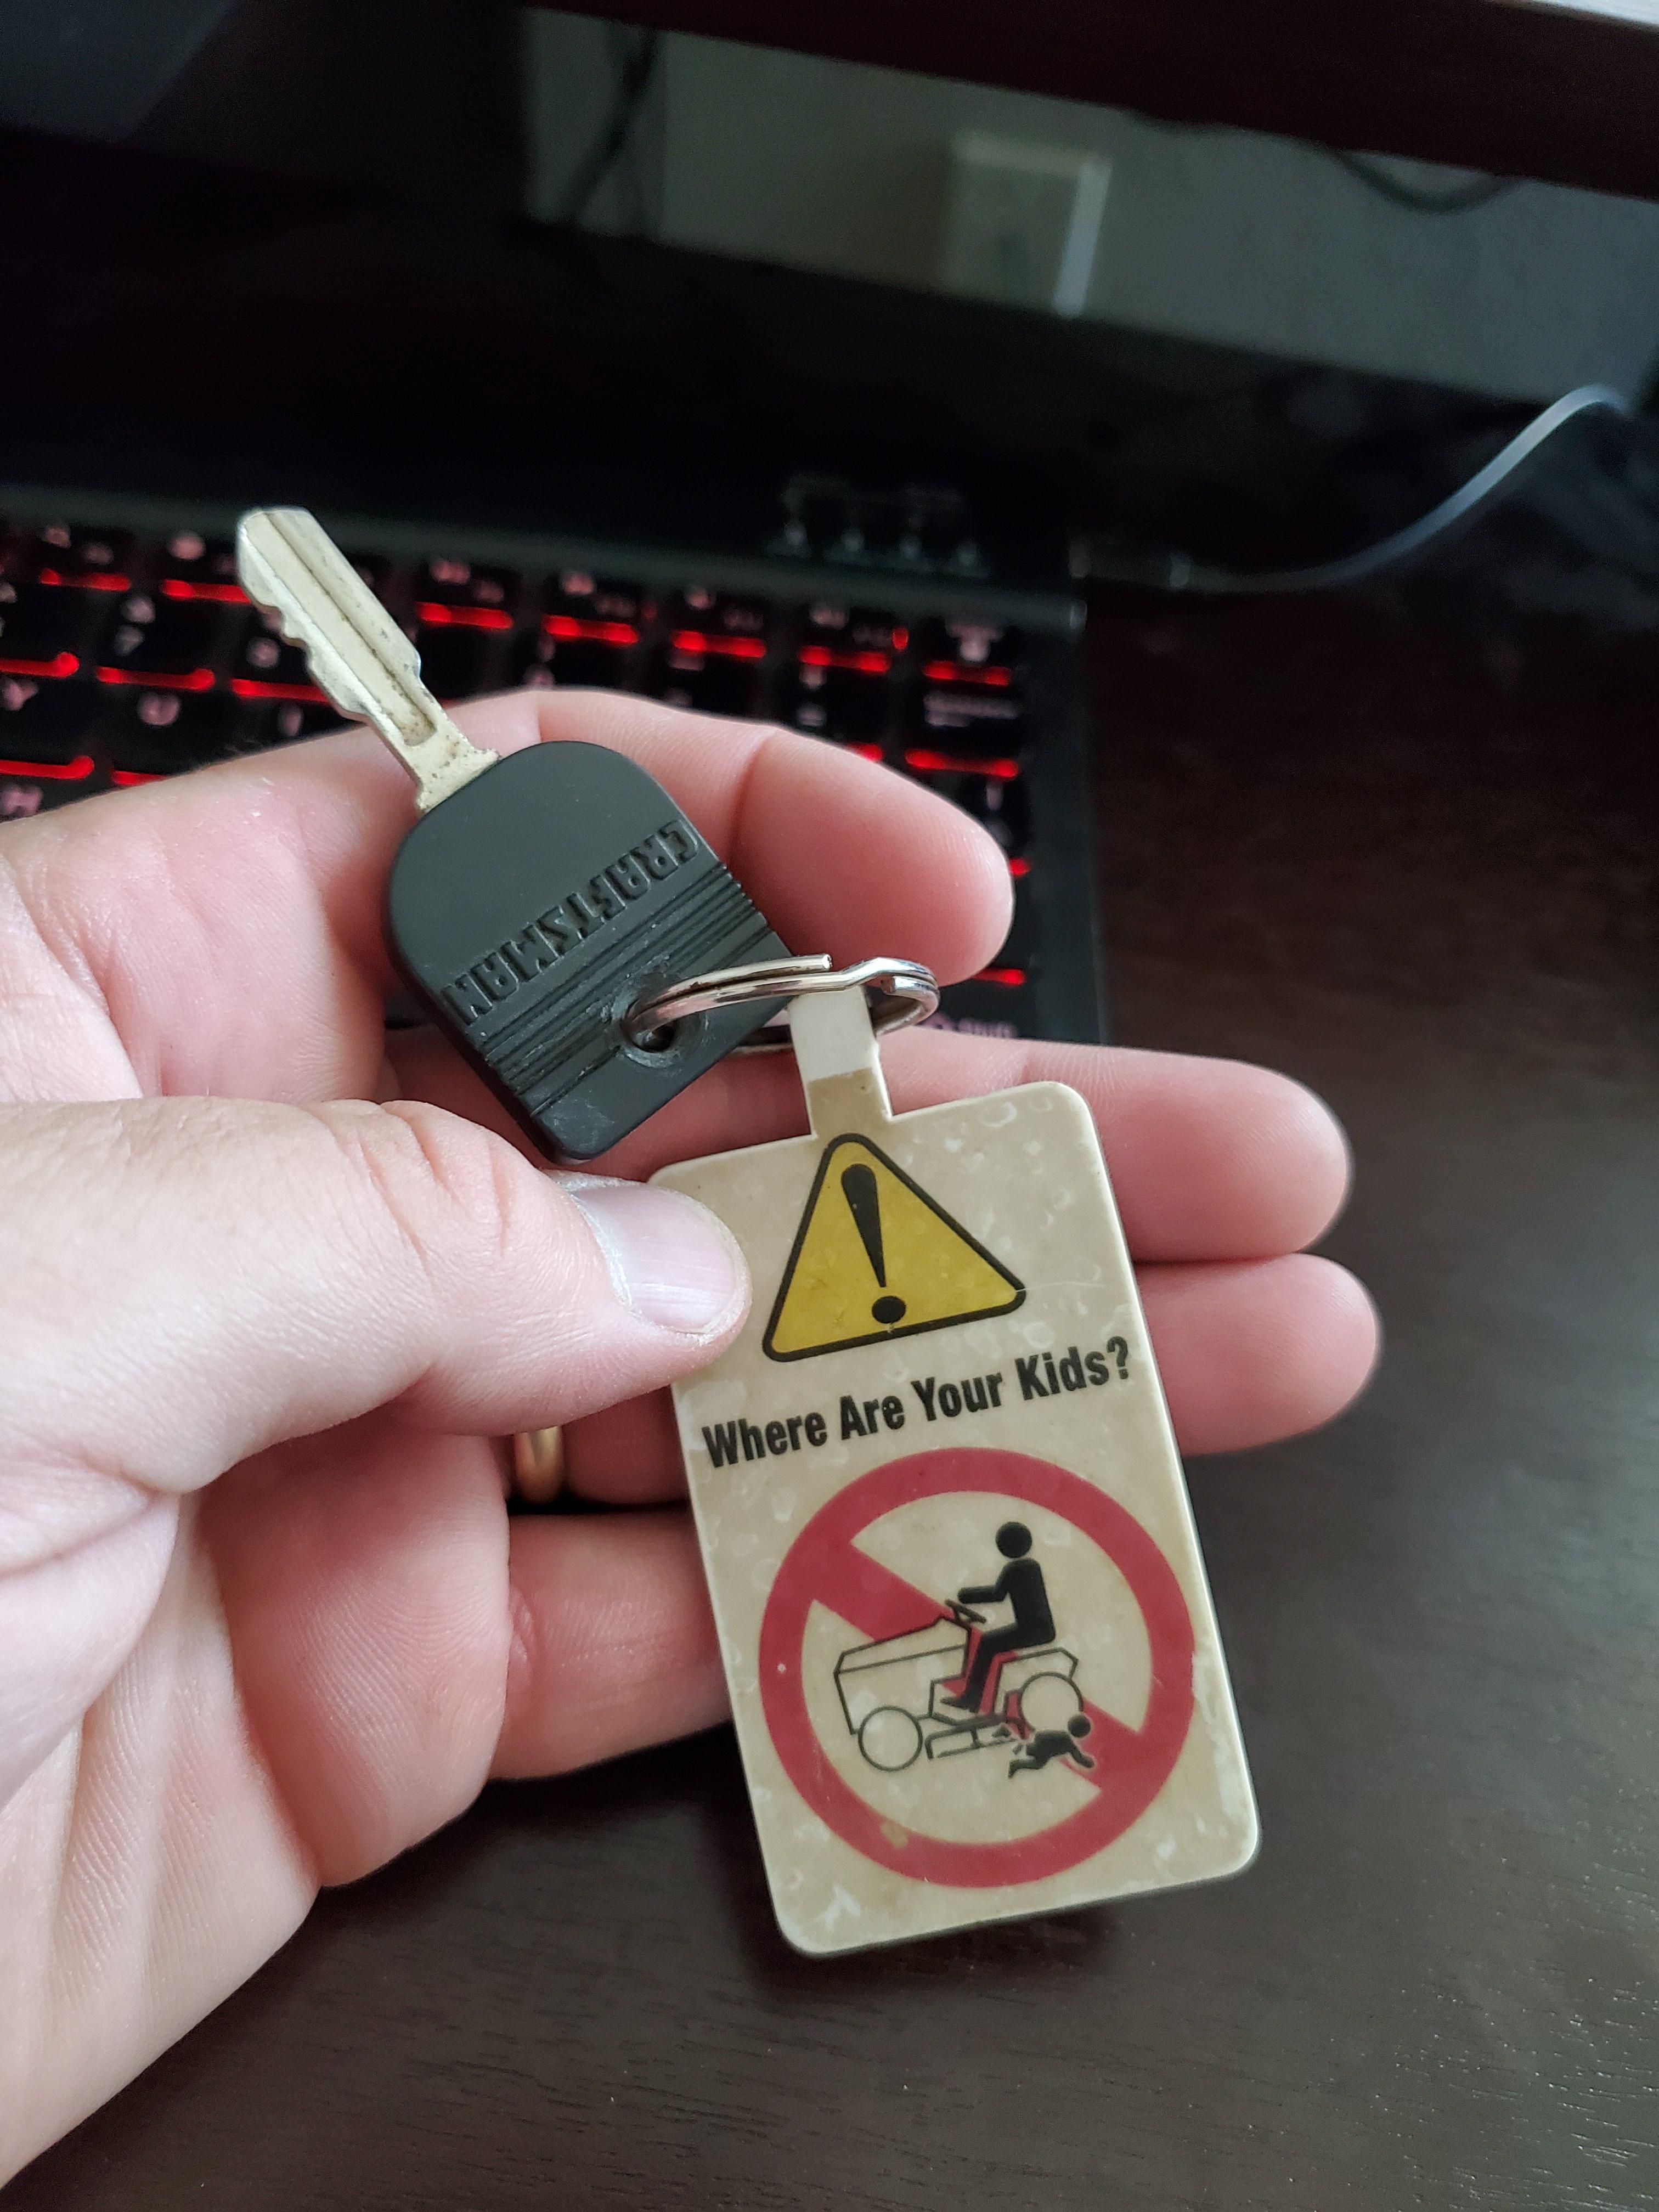 My lawn mower key has a warning to not mow over your kids